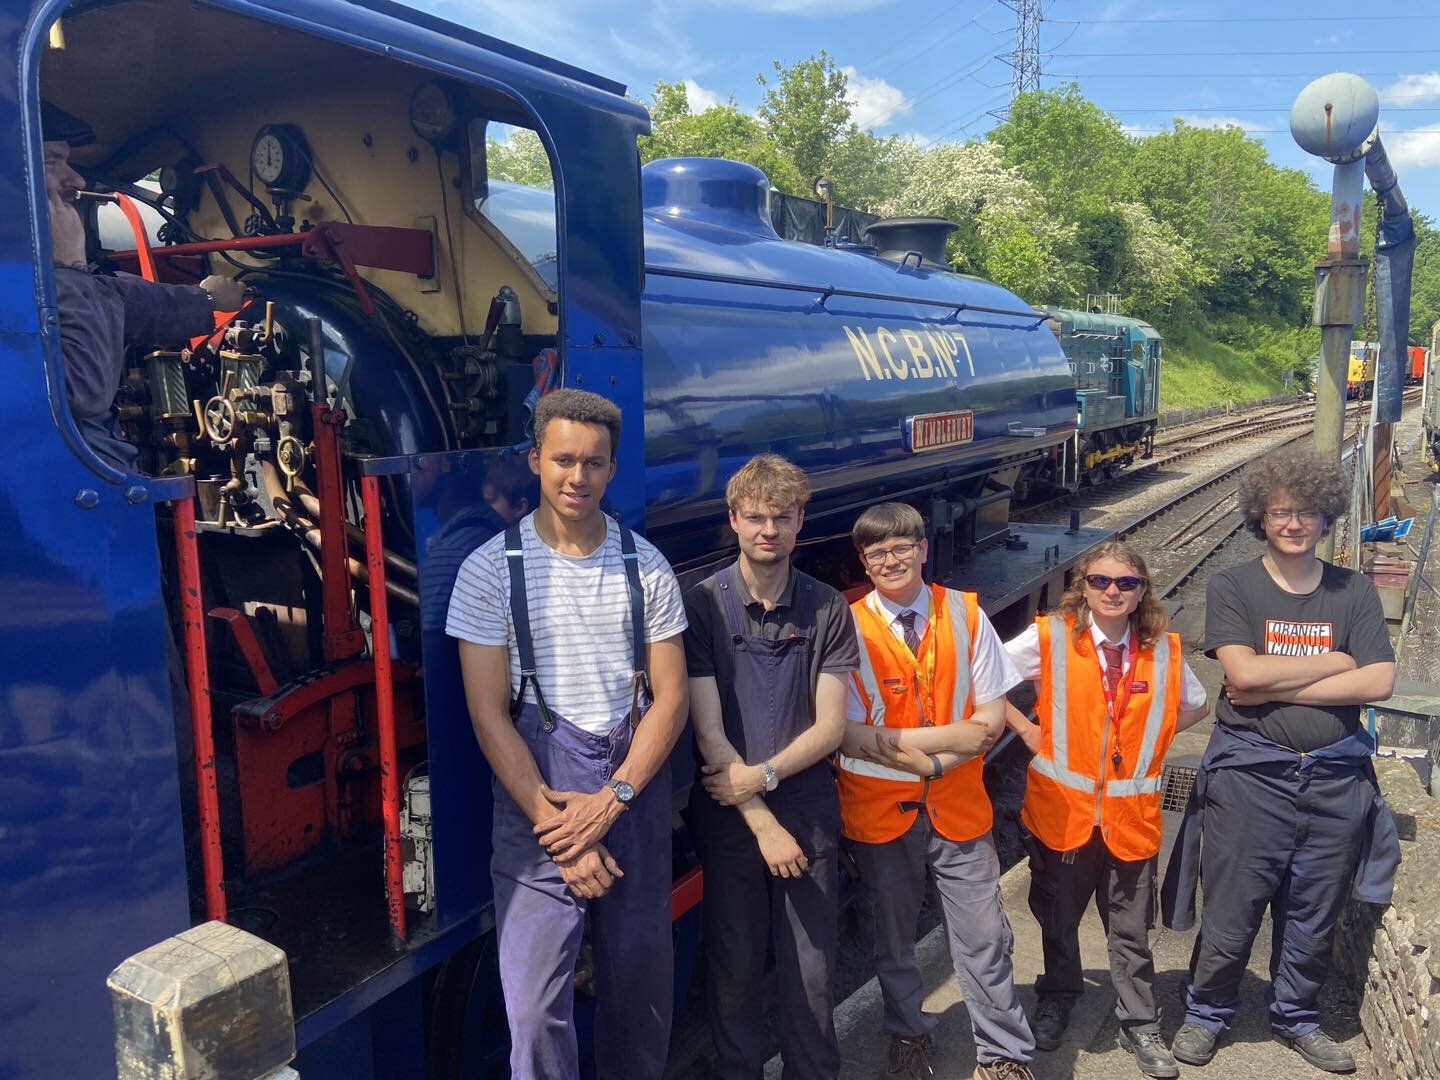 Today&rsquo;s operations crew at the railway have an average age of 21! 🚂
Here we see some of the crew including our fireman, cleaner, guard, gatekeeper and shed cleaner.

Ever thought about volunteering? 
https://www.avonvalleyrailway.org/support-u